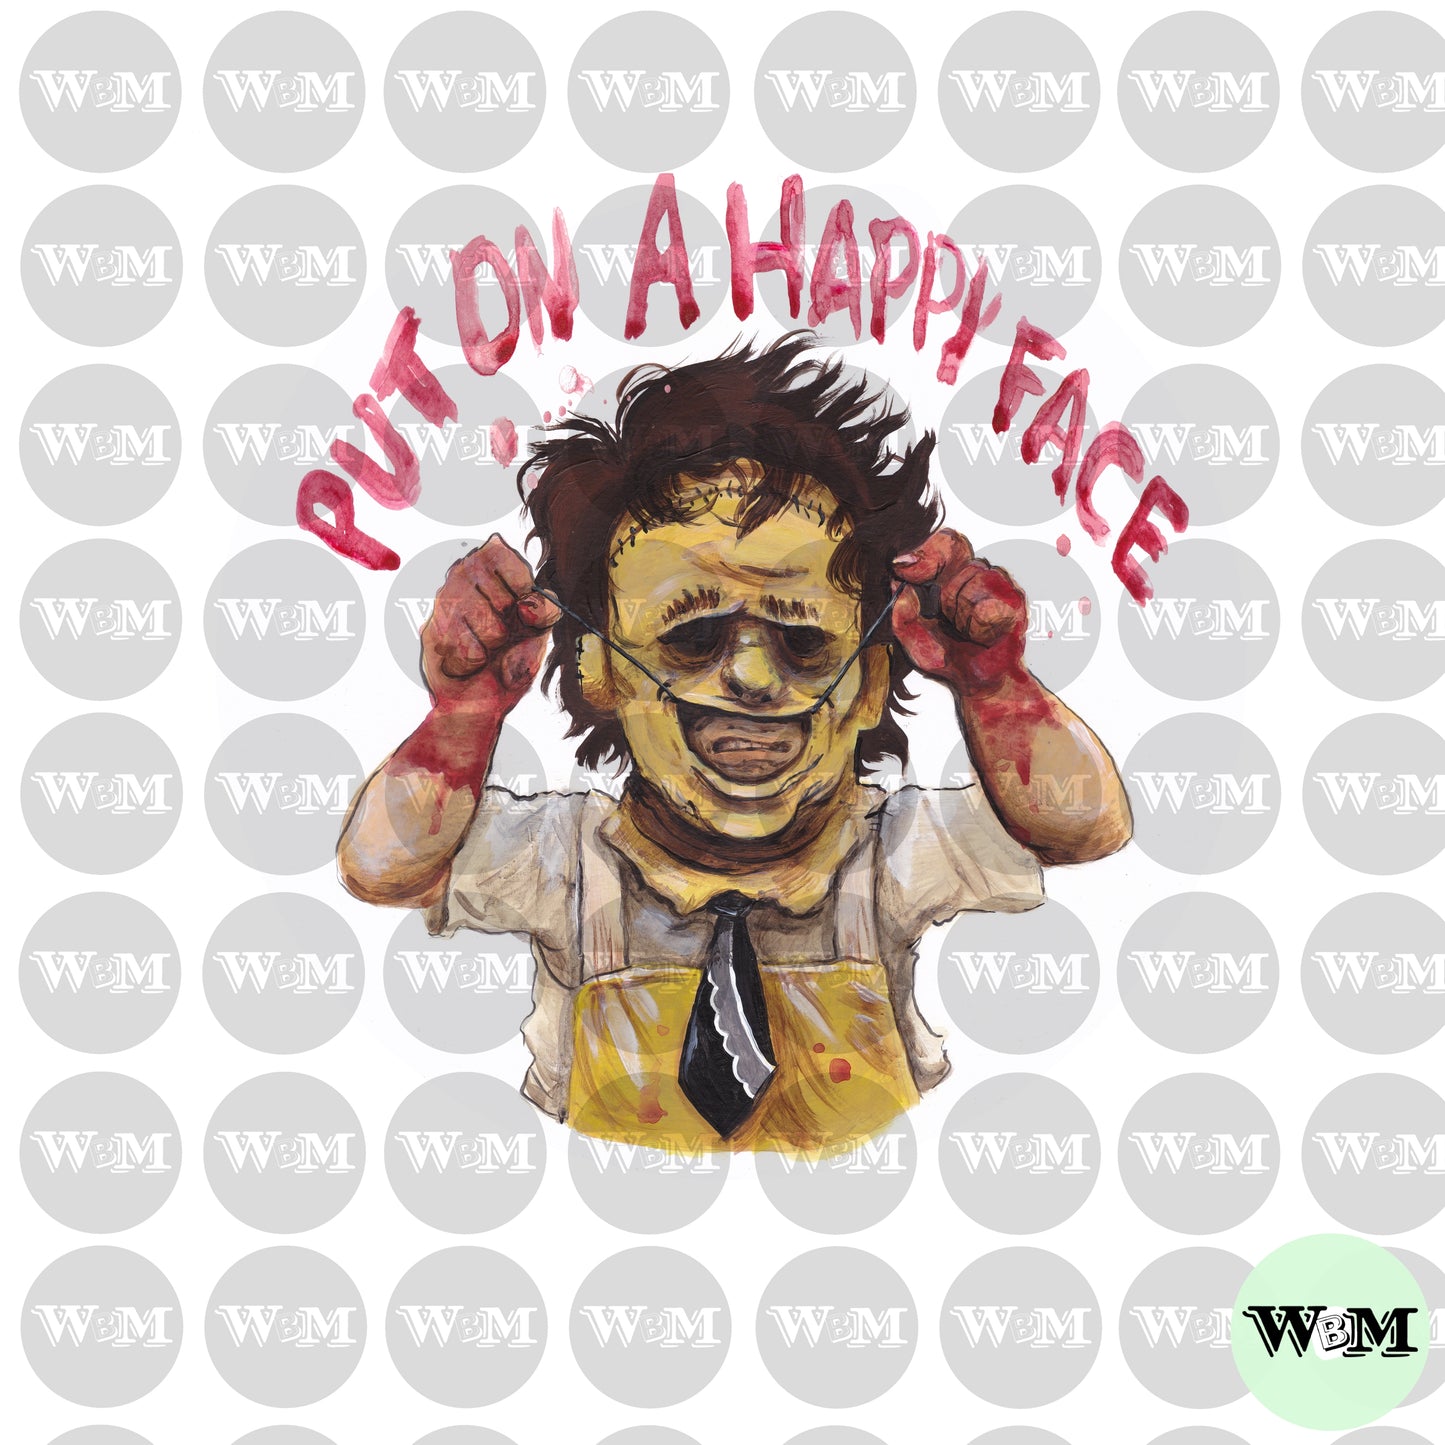 Leatherface - Put on a Happy Face